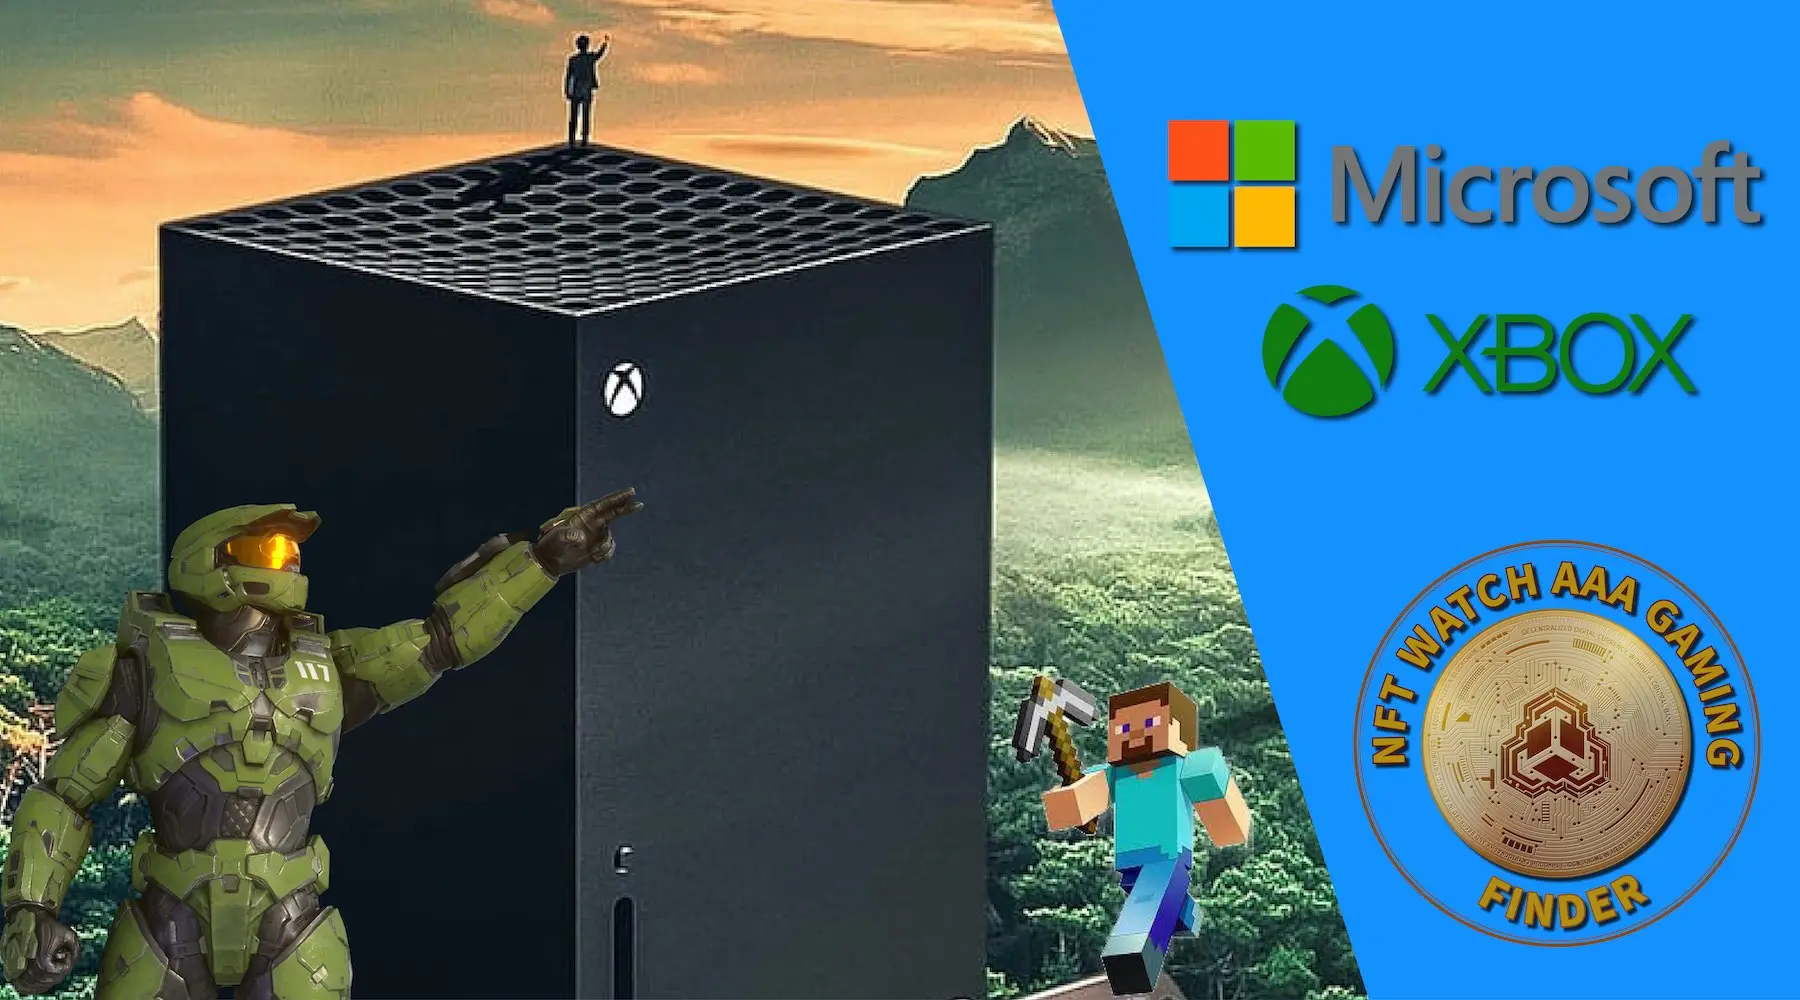 Microsoft, Xbox NFTs, metaverse and blockchain: Complete guide